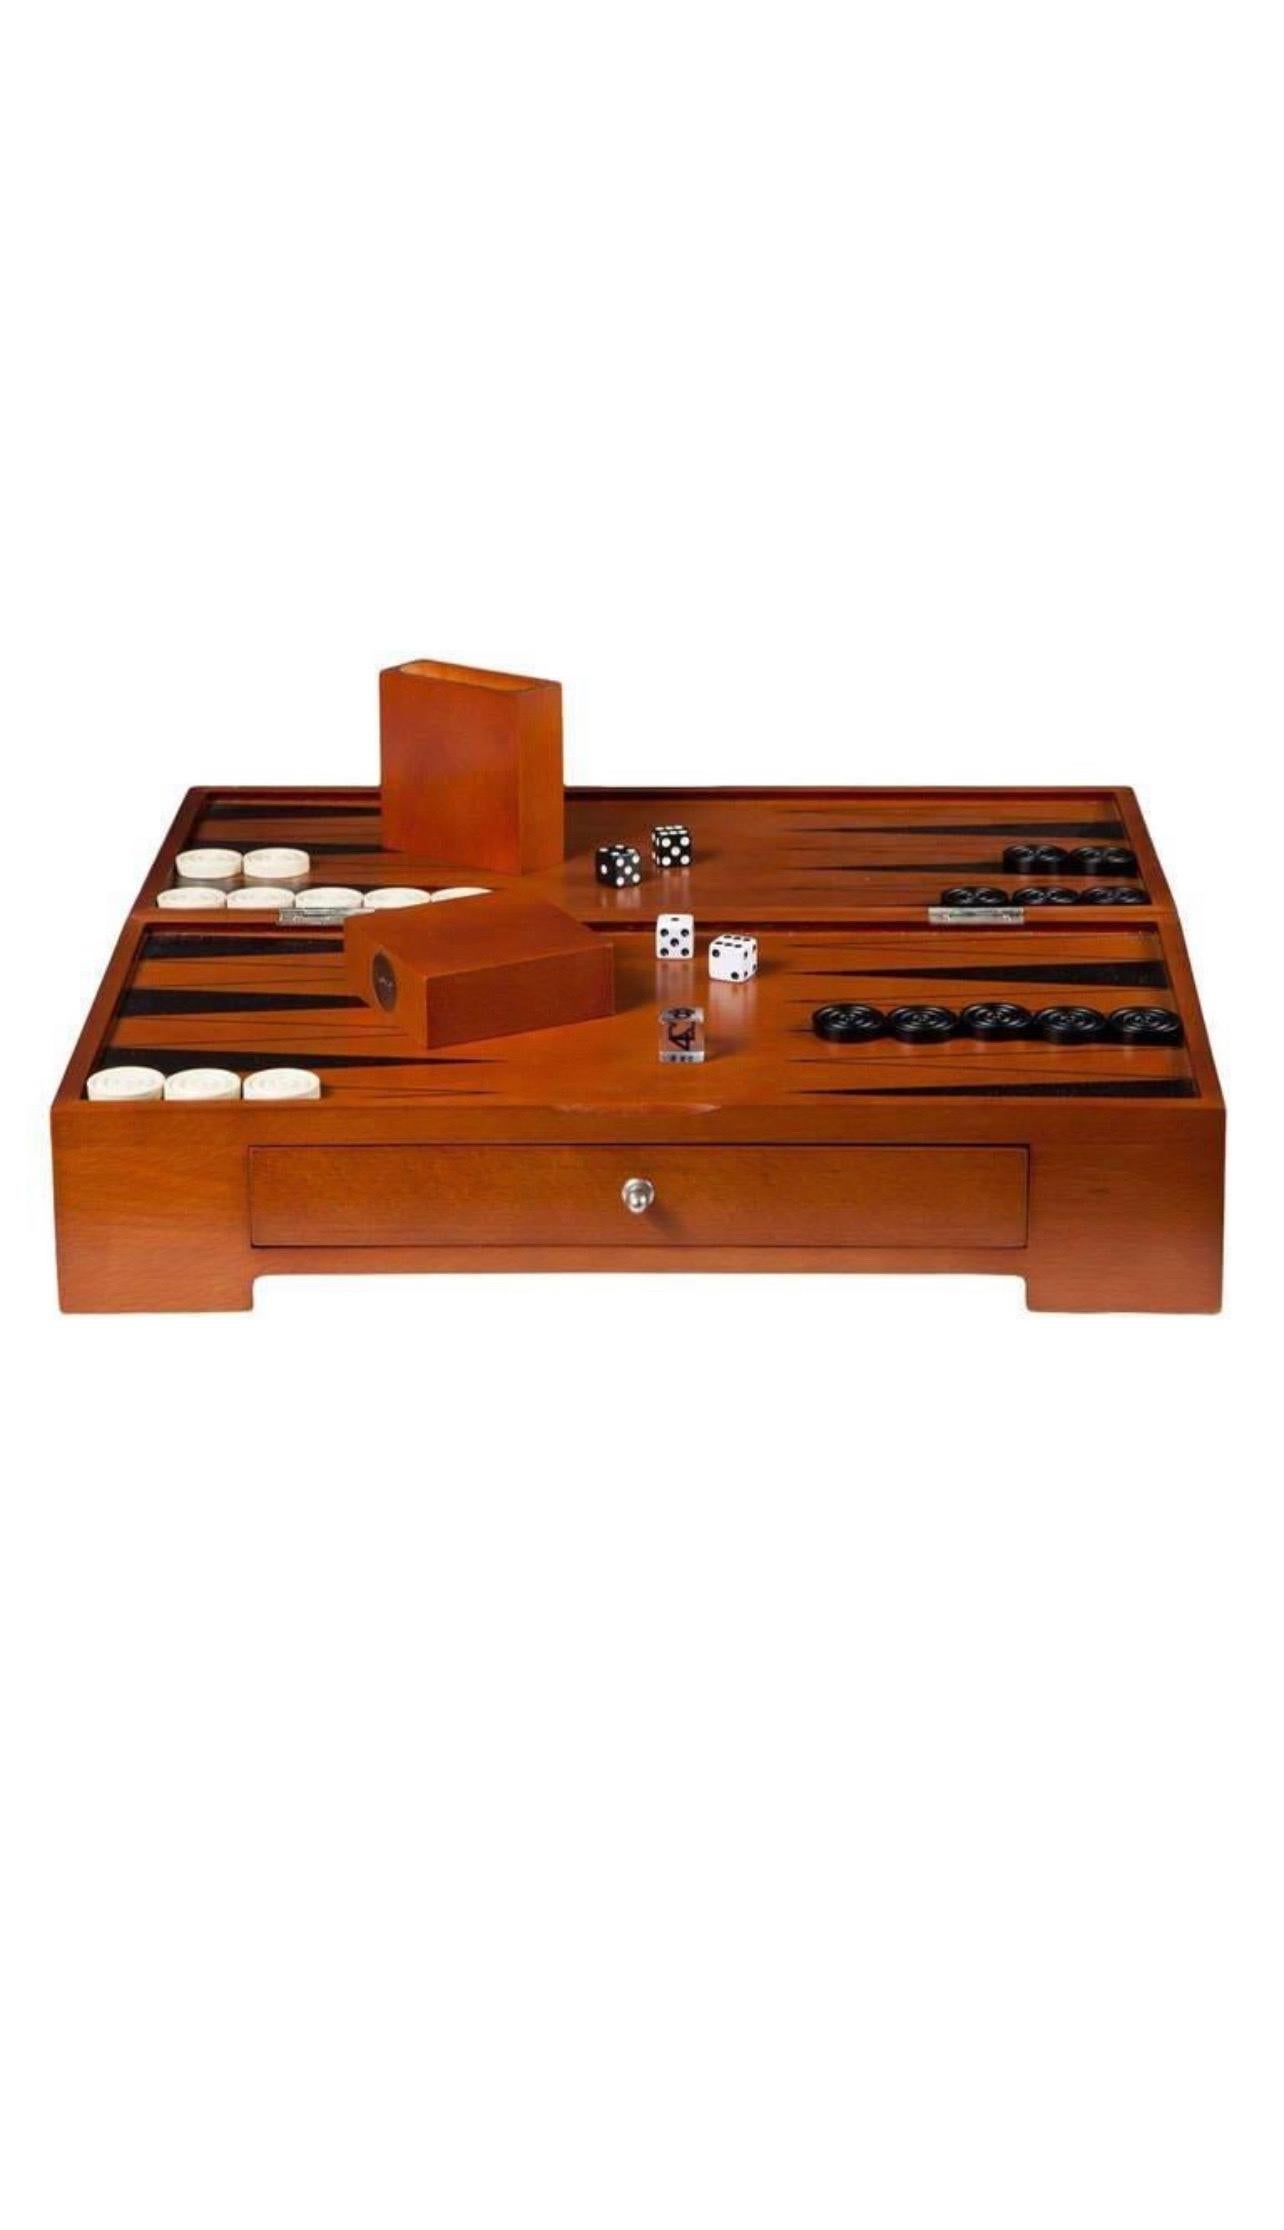 A backgammon board designed by famed architect Michael Graves. 

Imported, circa 1990. 

Signed with metal tag.

Finely constructed of cherry stained hardwood and veneers. 
Features legs that fold out to support board and a felt-lined drawer for